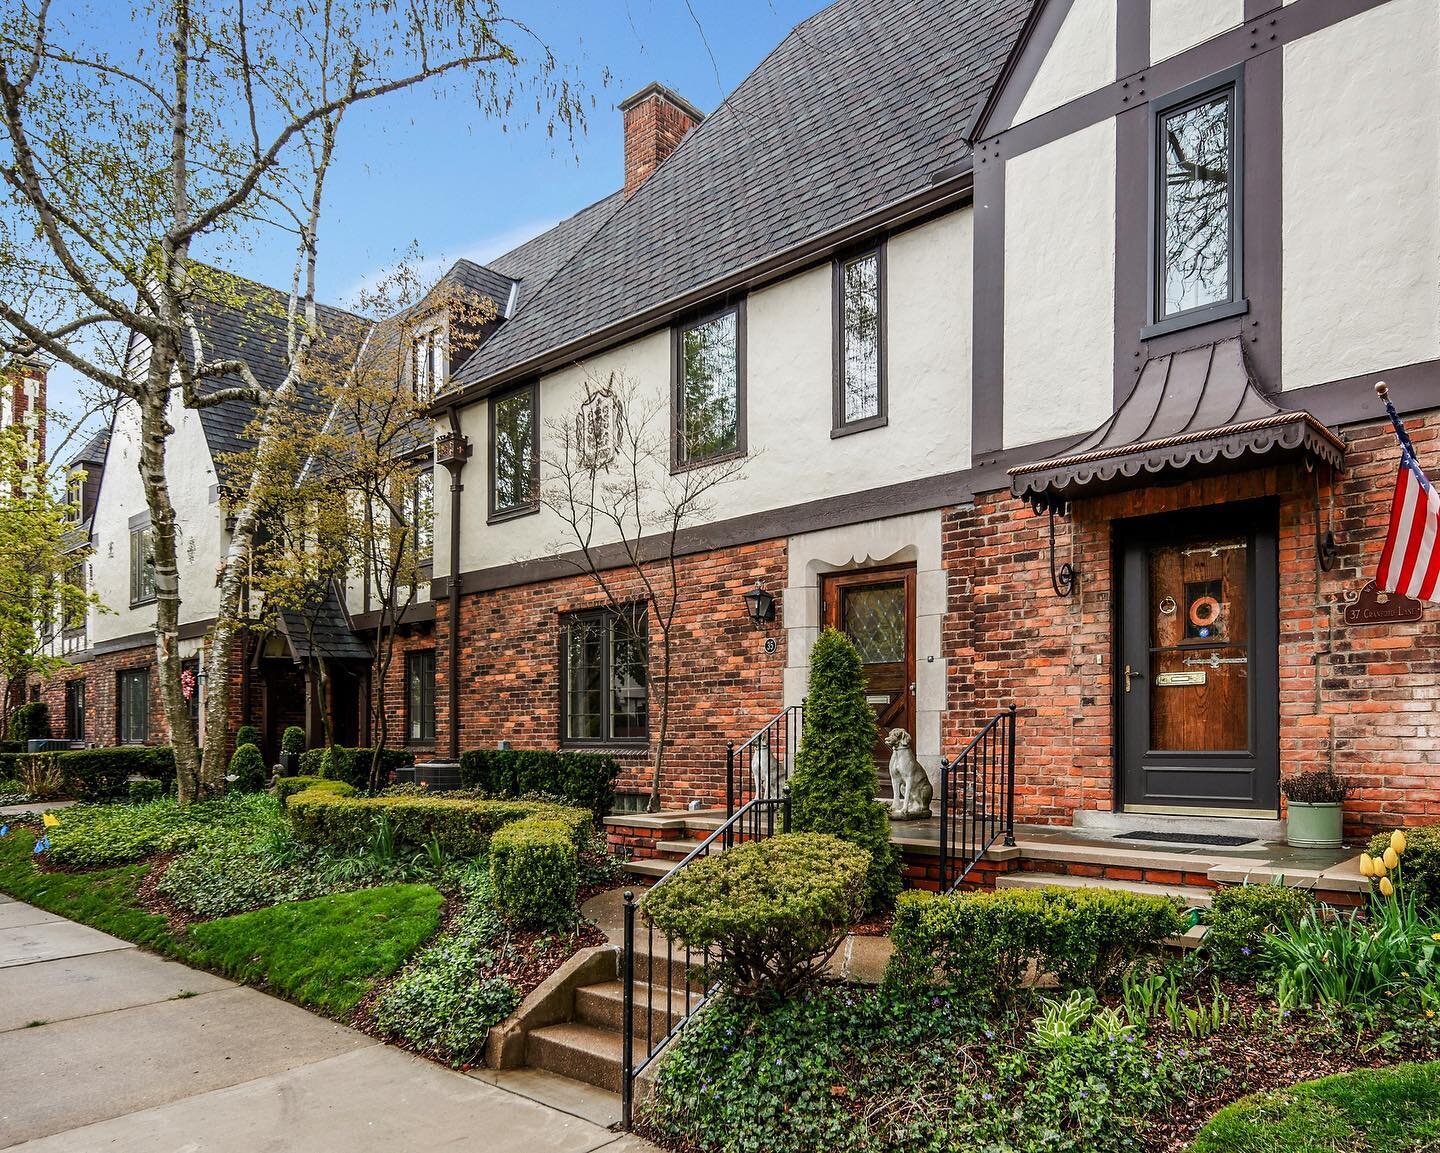 🌳GROSSE POINTE - Condo living without compromise. A lot of people don't realize Grosse Pointe has some really nice condo units, most have great classical architecture, are situated on lots with mature trees, and have private entrances. This particul